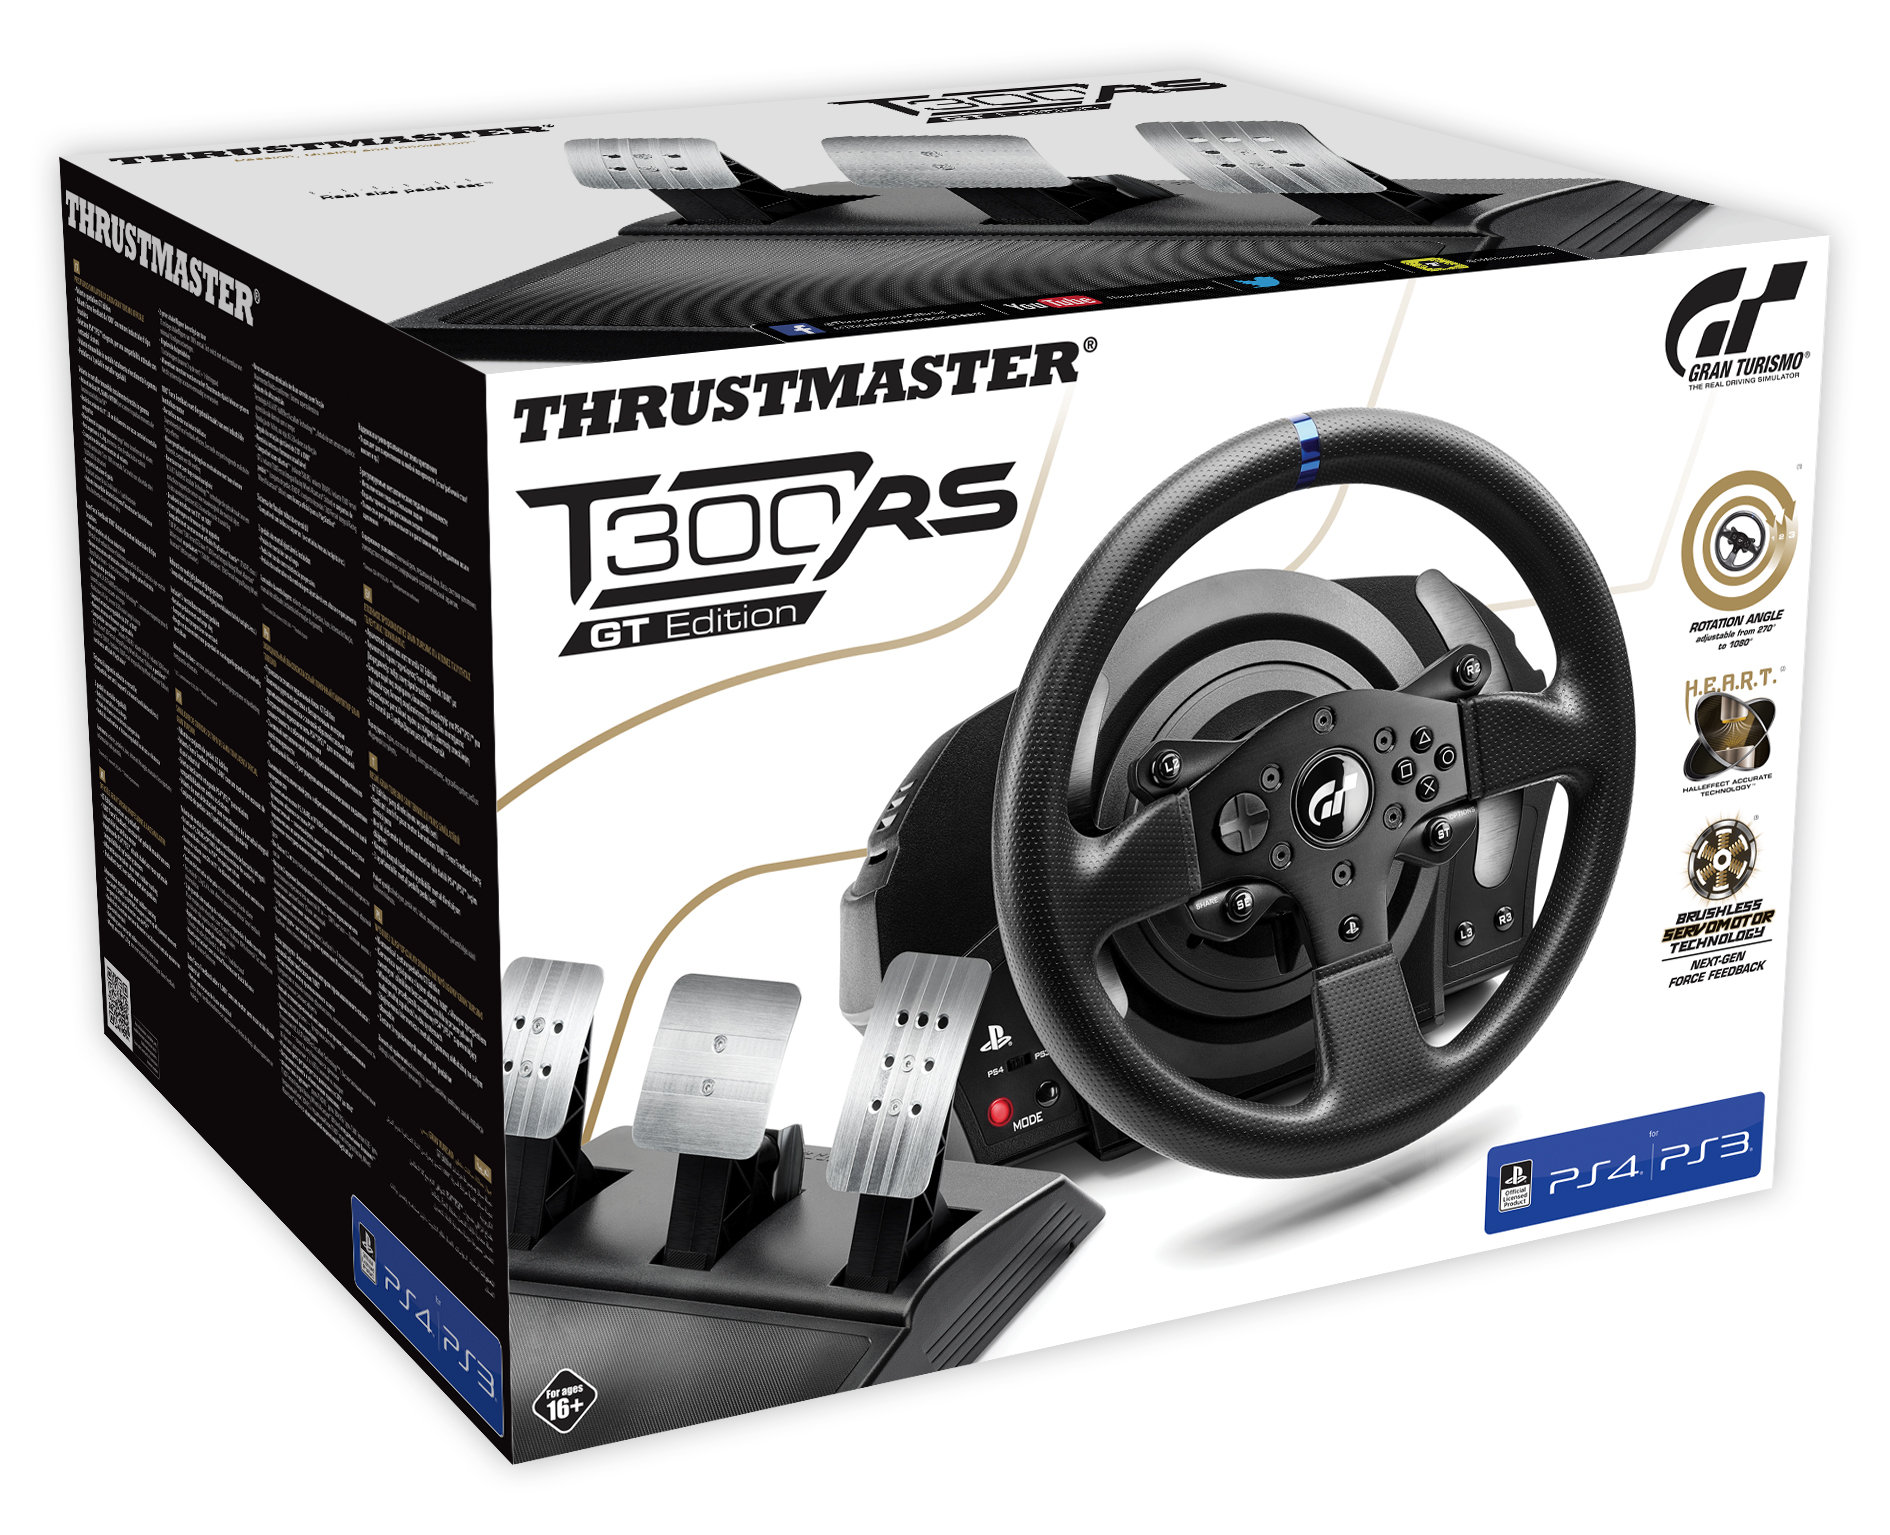 THRUSTMASTER T300RS GT EDITION RACING WHEEL - PChome 商店街